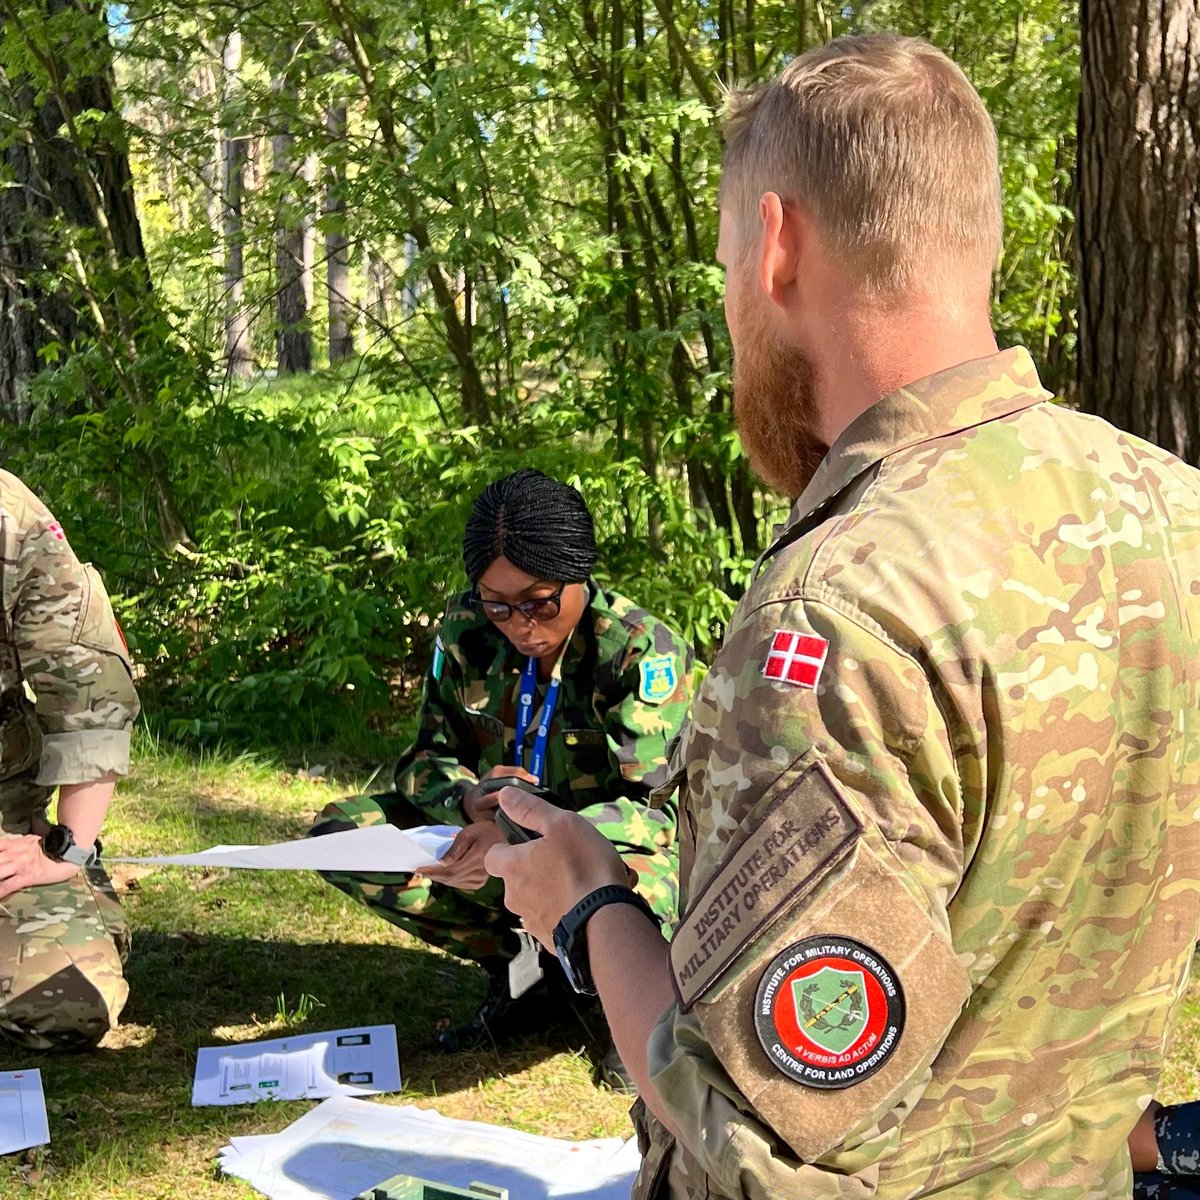 During the 1st week the participants of UN Military Observer course have been busy rehearsing basic skills such as cross country driving, radio communication, using GPS, First-Aid and reporting before moving to field conditions. 

#UNMOC #unpeacekeeping #UN #militaryobserver